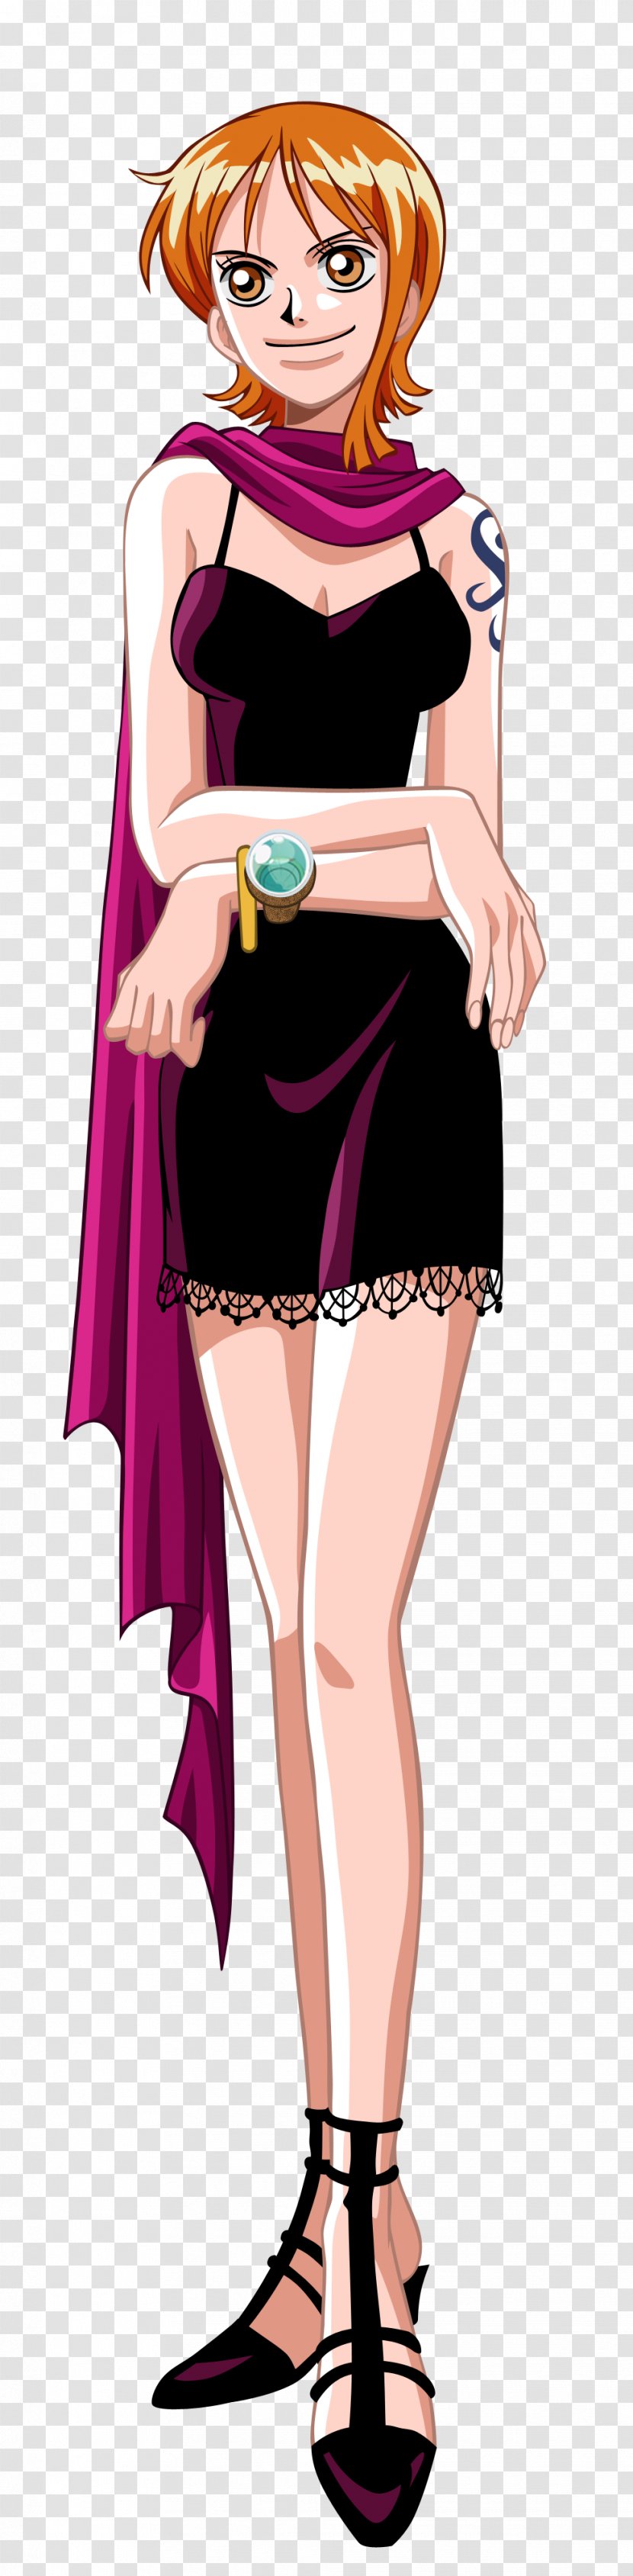 Nami Monkey D. Luffy Nico Robin One Piece Character - Heart Transparent PNG